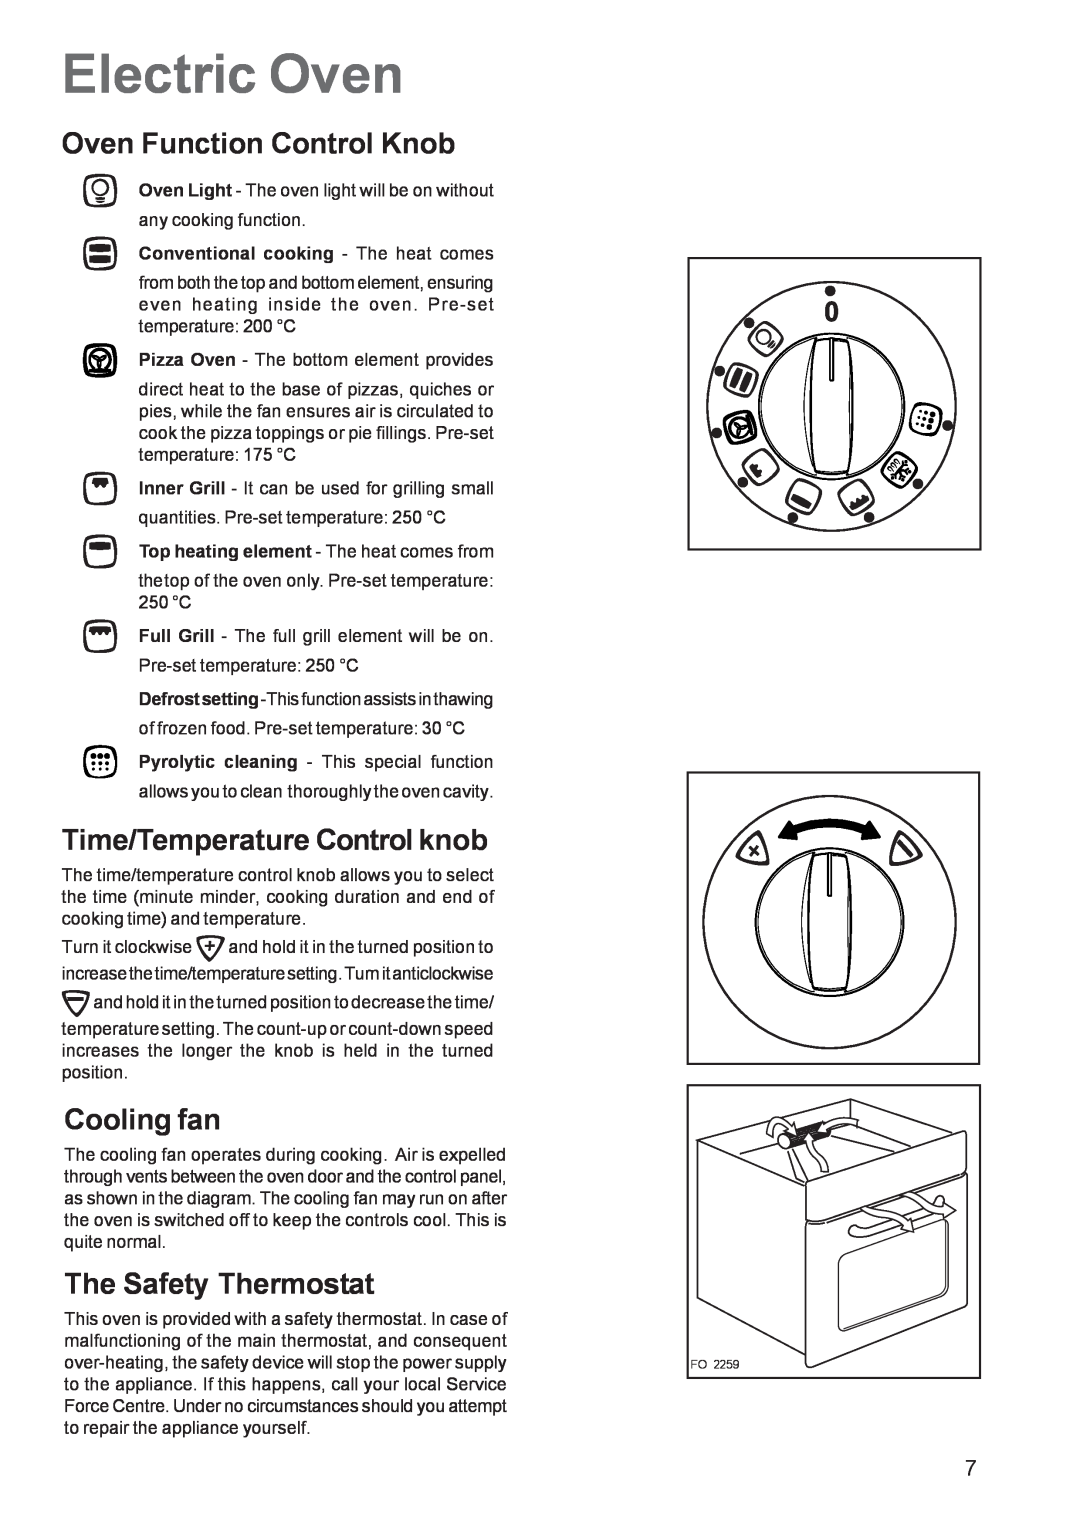 Zanussi ZCM 650 ZCM 651 manual Electric Oven, Oven Function Control Knob, Time/Temperature Control knob, Cooling fan 